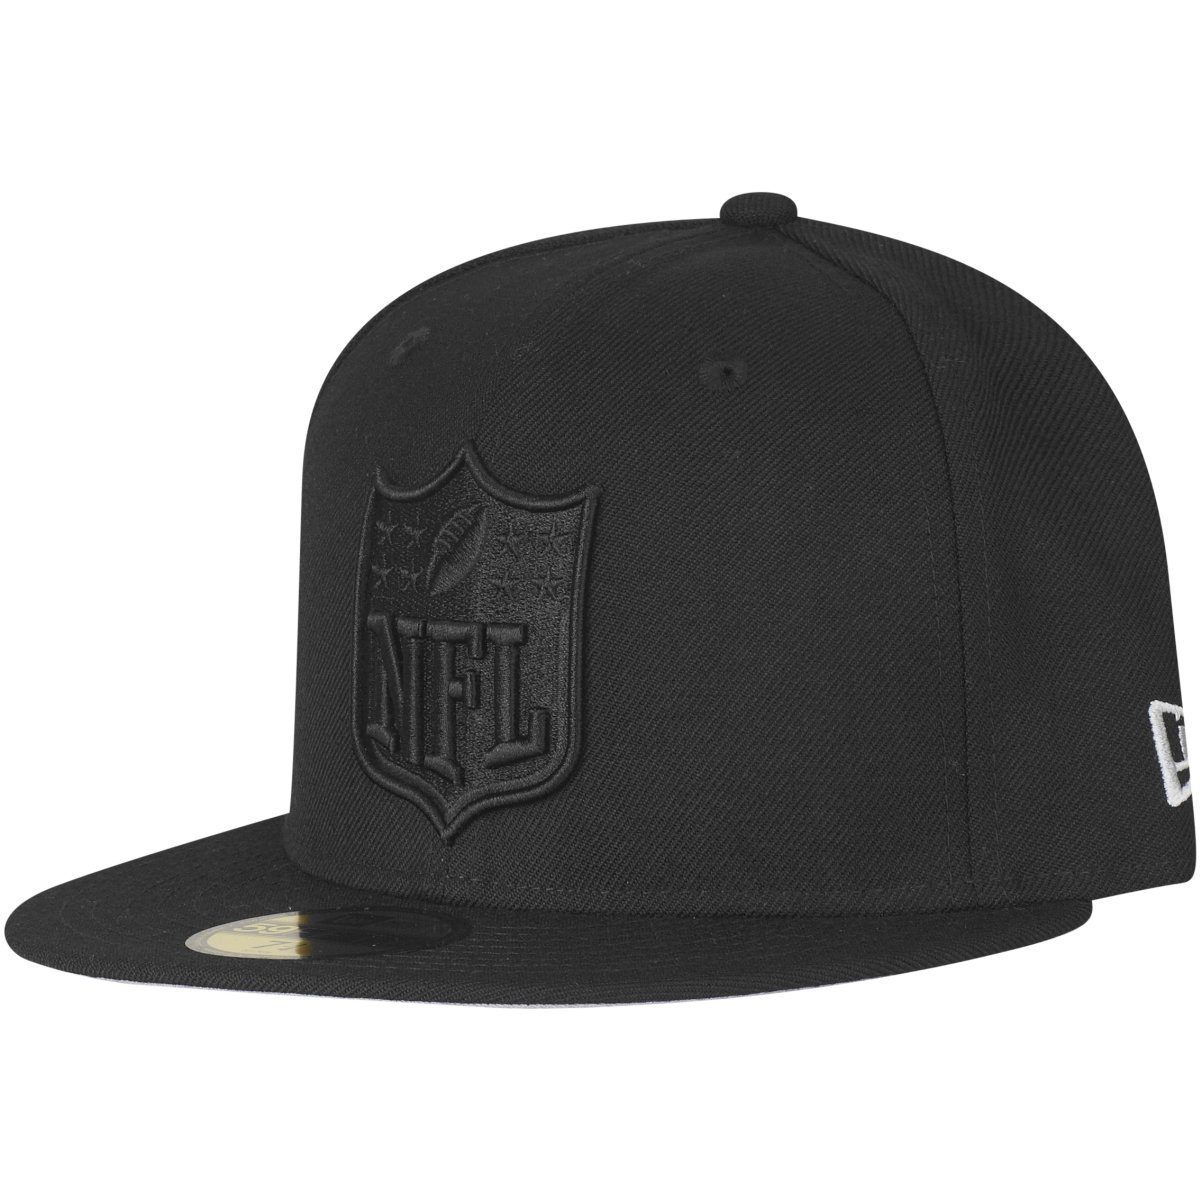 New Era Fitted Cap NFL SHIELD 59Fifty Logo